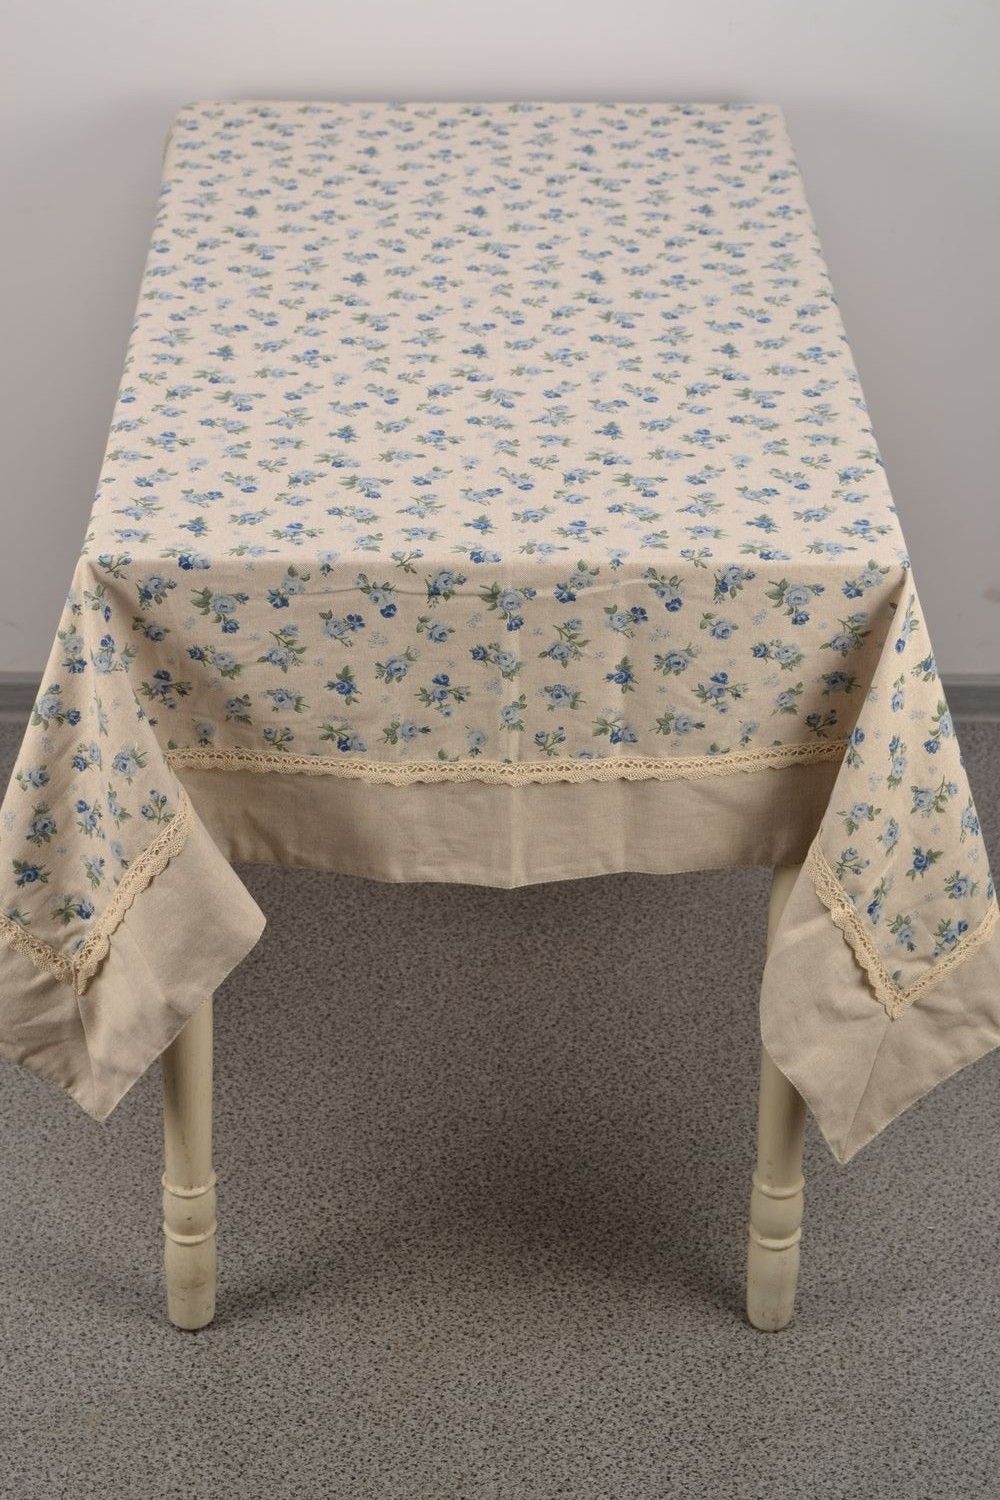 Handmade tablecloth with lace and edging photo 2